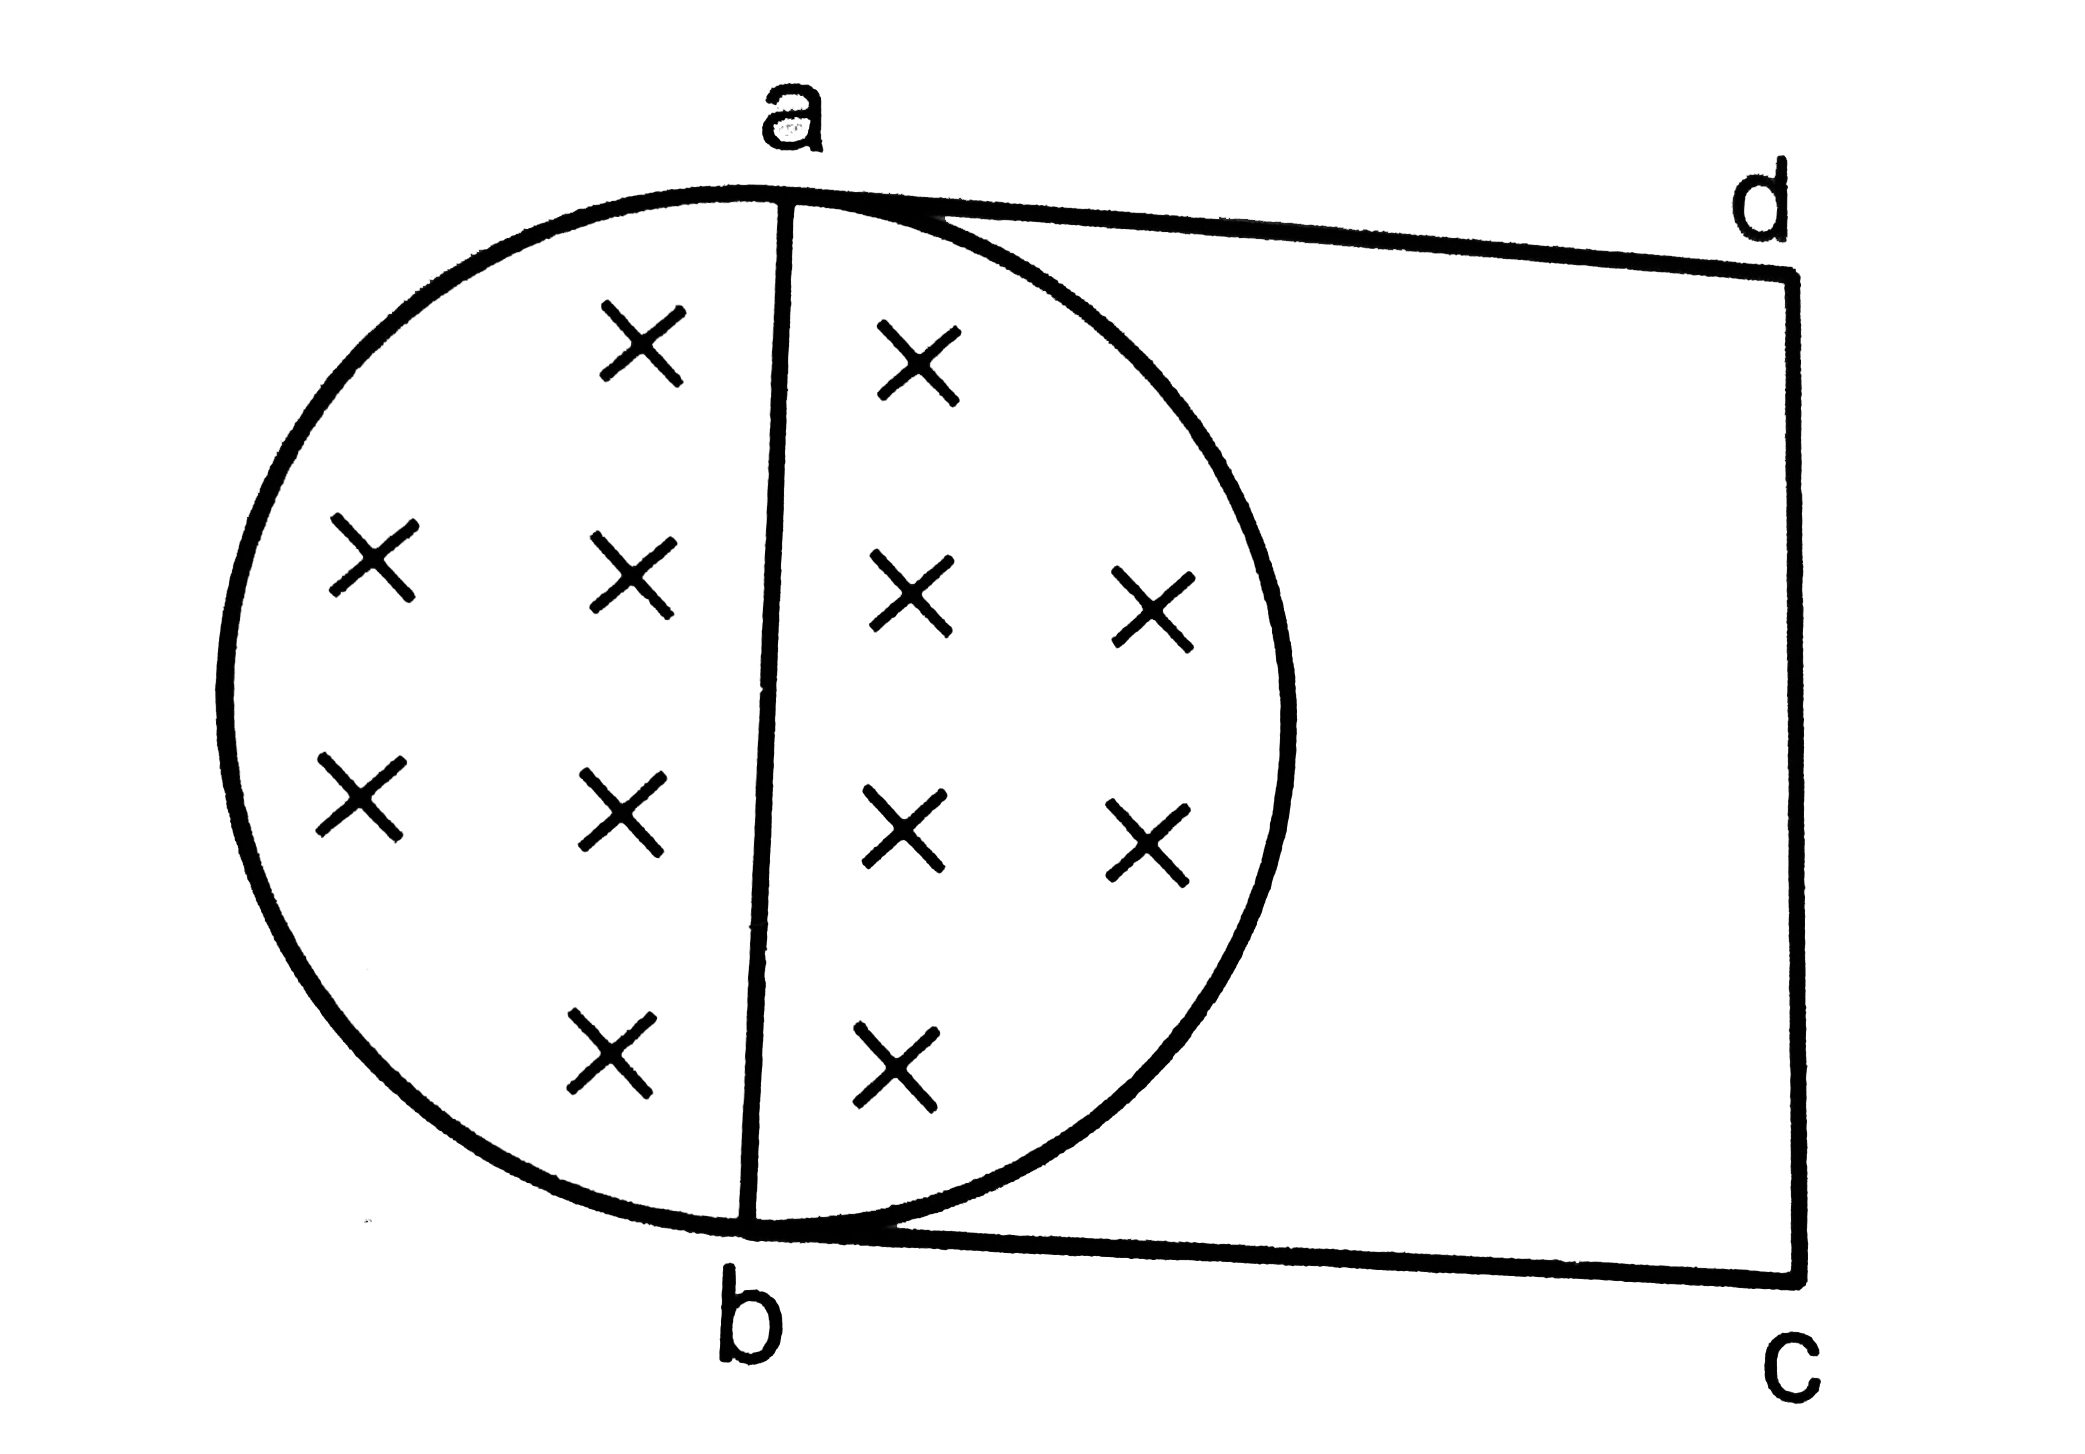 A unifrom magnetic field B exists in a cylindrical region of radius 10 cm as shown in. A uniform wire of length 80 cm and resistance 4.0 Omega is bent into a square frame and is placed with one side along a diameter of the cylindrical region. If the magnetic field increases at a  constant rate of 0.010 T/s, find the current induced in the frame.